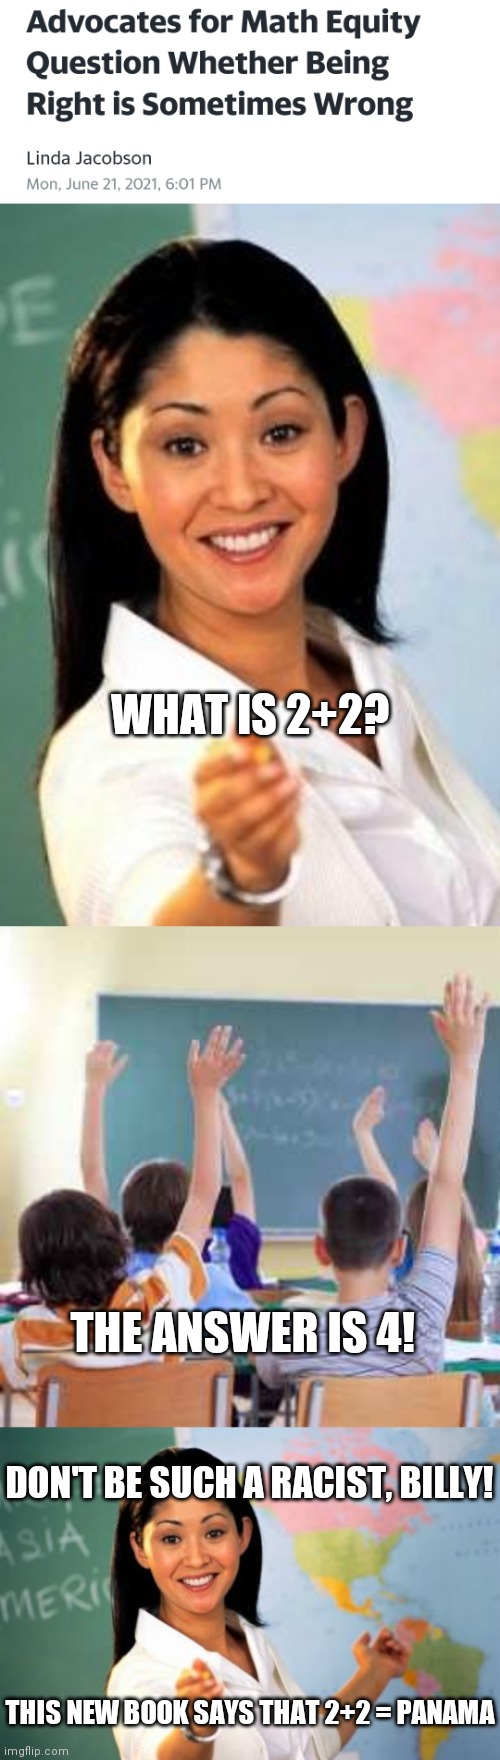 So the Left is all for holding back black people I guess. They think they're not capable. | WHAT IS 2+2? THE ANSWER IS 4! DON'T BE SUCH A RACIST, BILLY! THIS NEW BOOK SAYS THAT 2+2 = PANAMA | image tagged in unhelpful teacher,classroom,memes,unhelpful high school teacher,racism,math | made w/ Imgflip meme maker